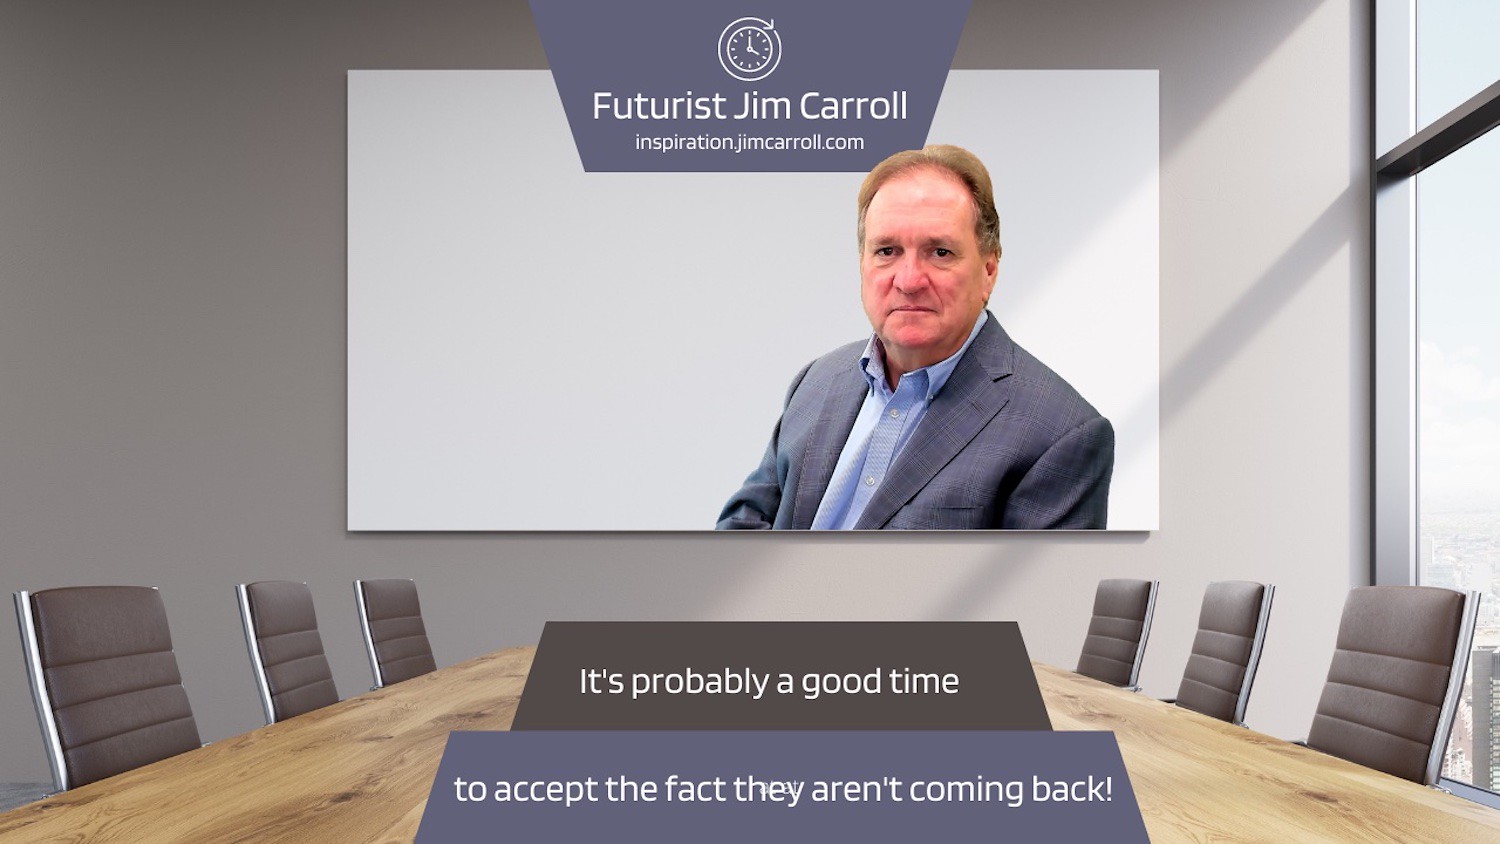 Gre"It's probably a good time to accept the fact they aren't coming back!" - Futurist Jim Carroll